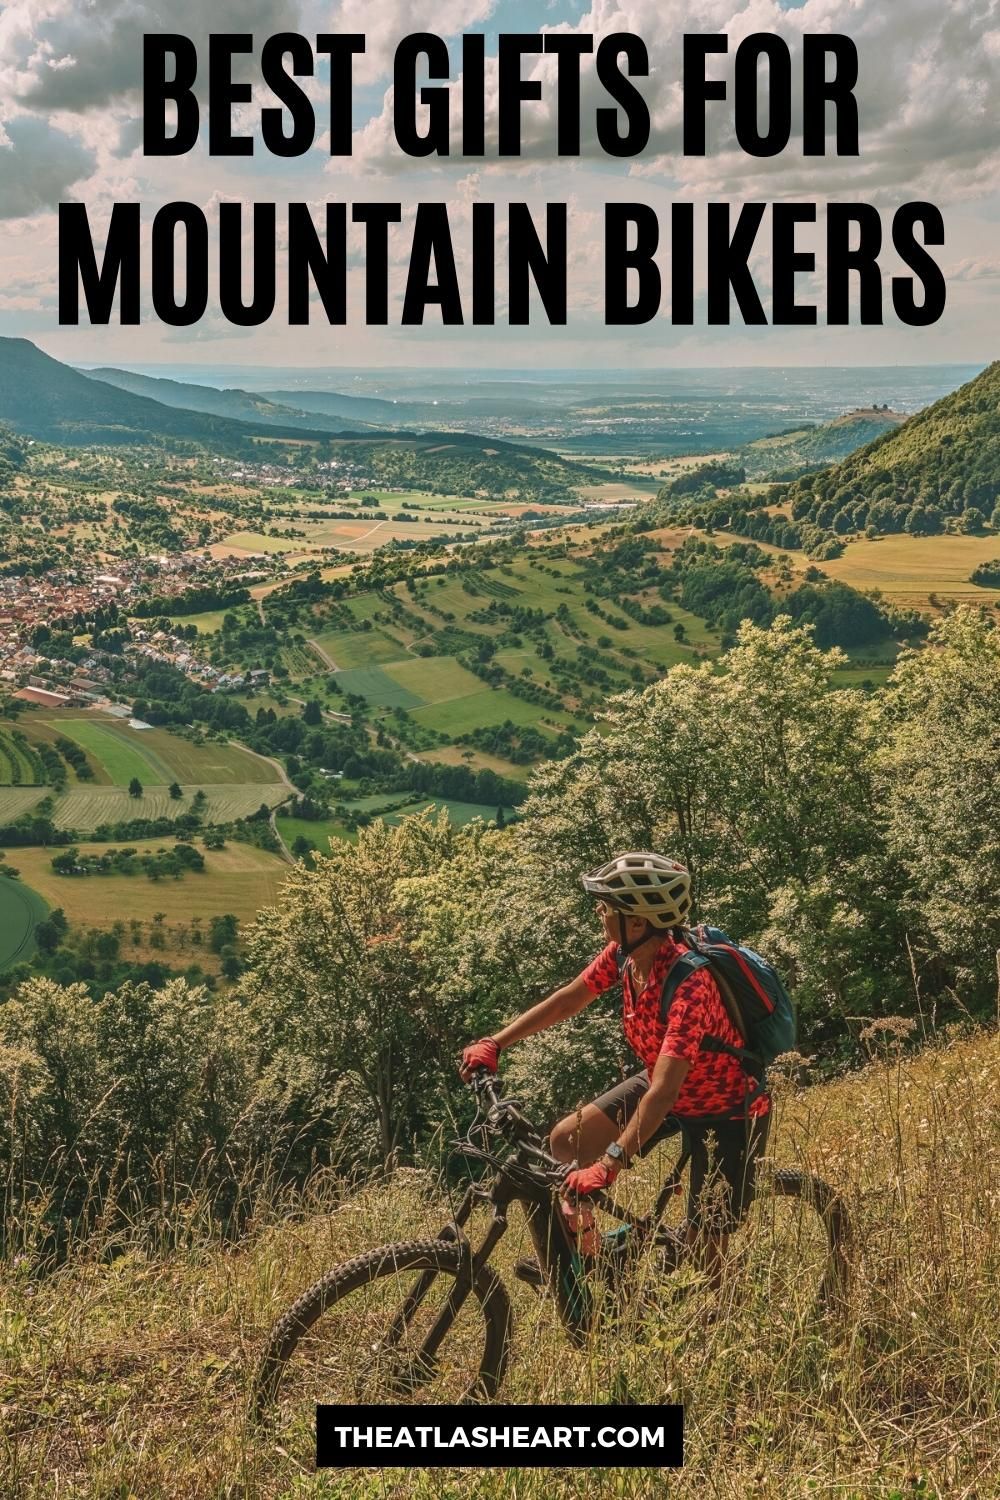 gifts for mountain bikers Pinterest pin